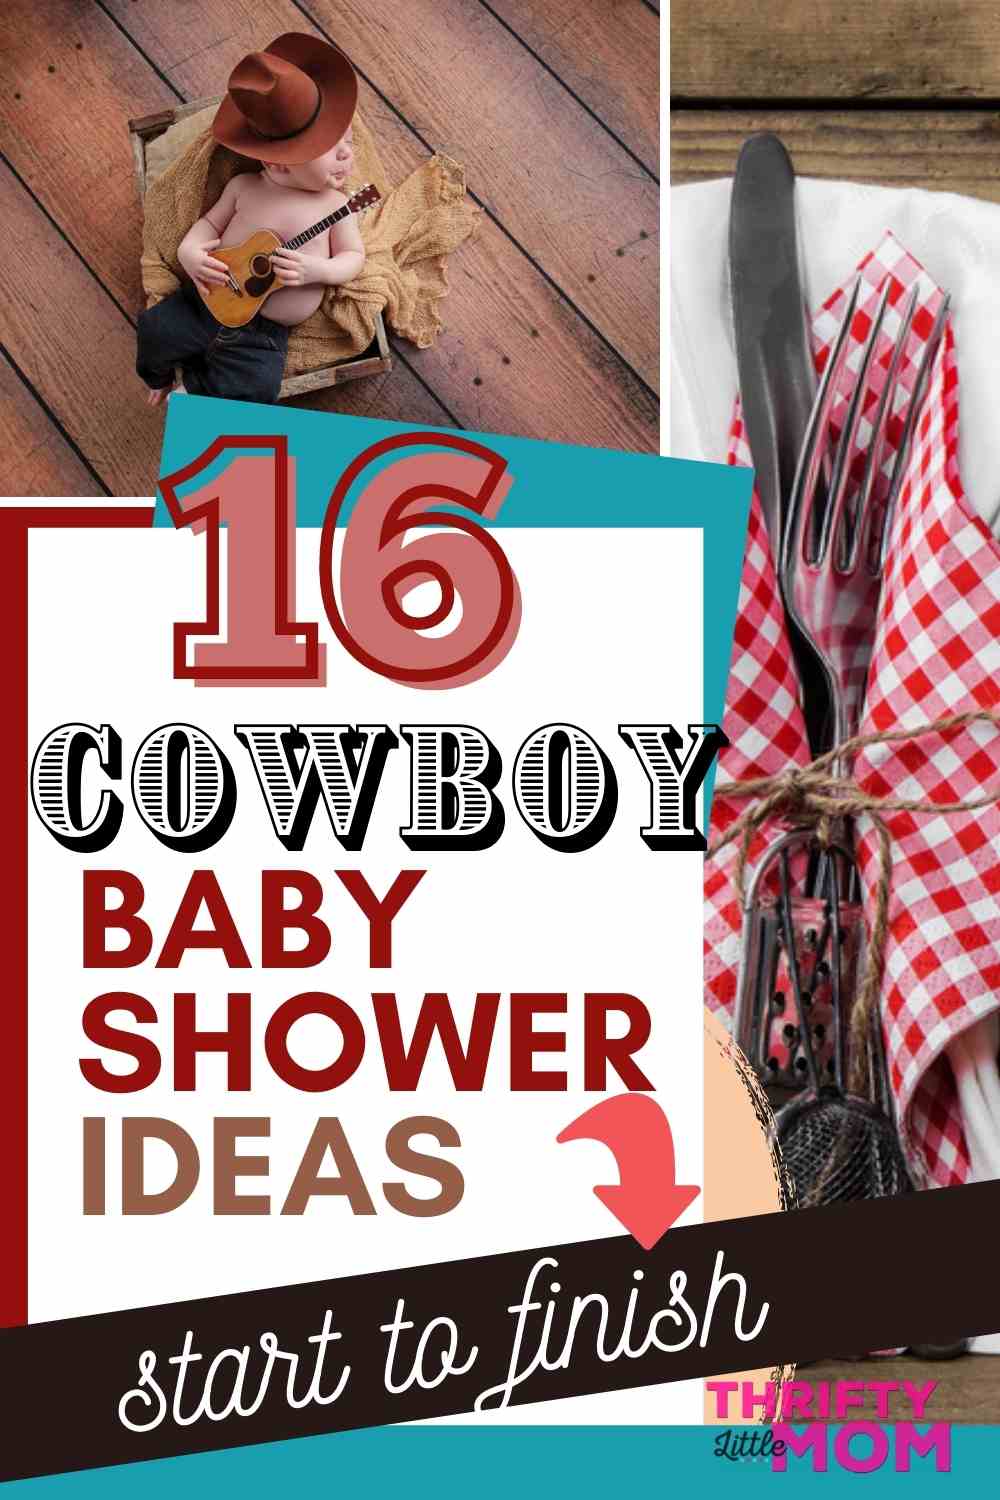 The Ultimate Cowboy Baby Shower Planning Guide